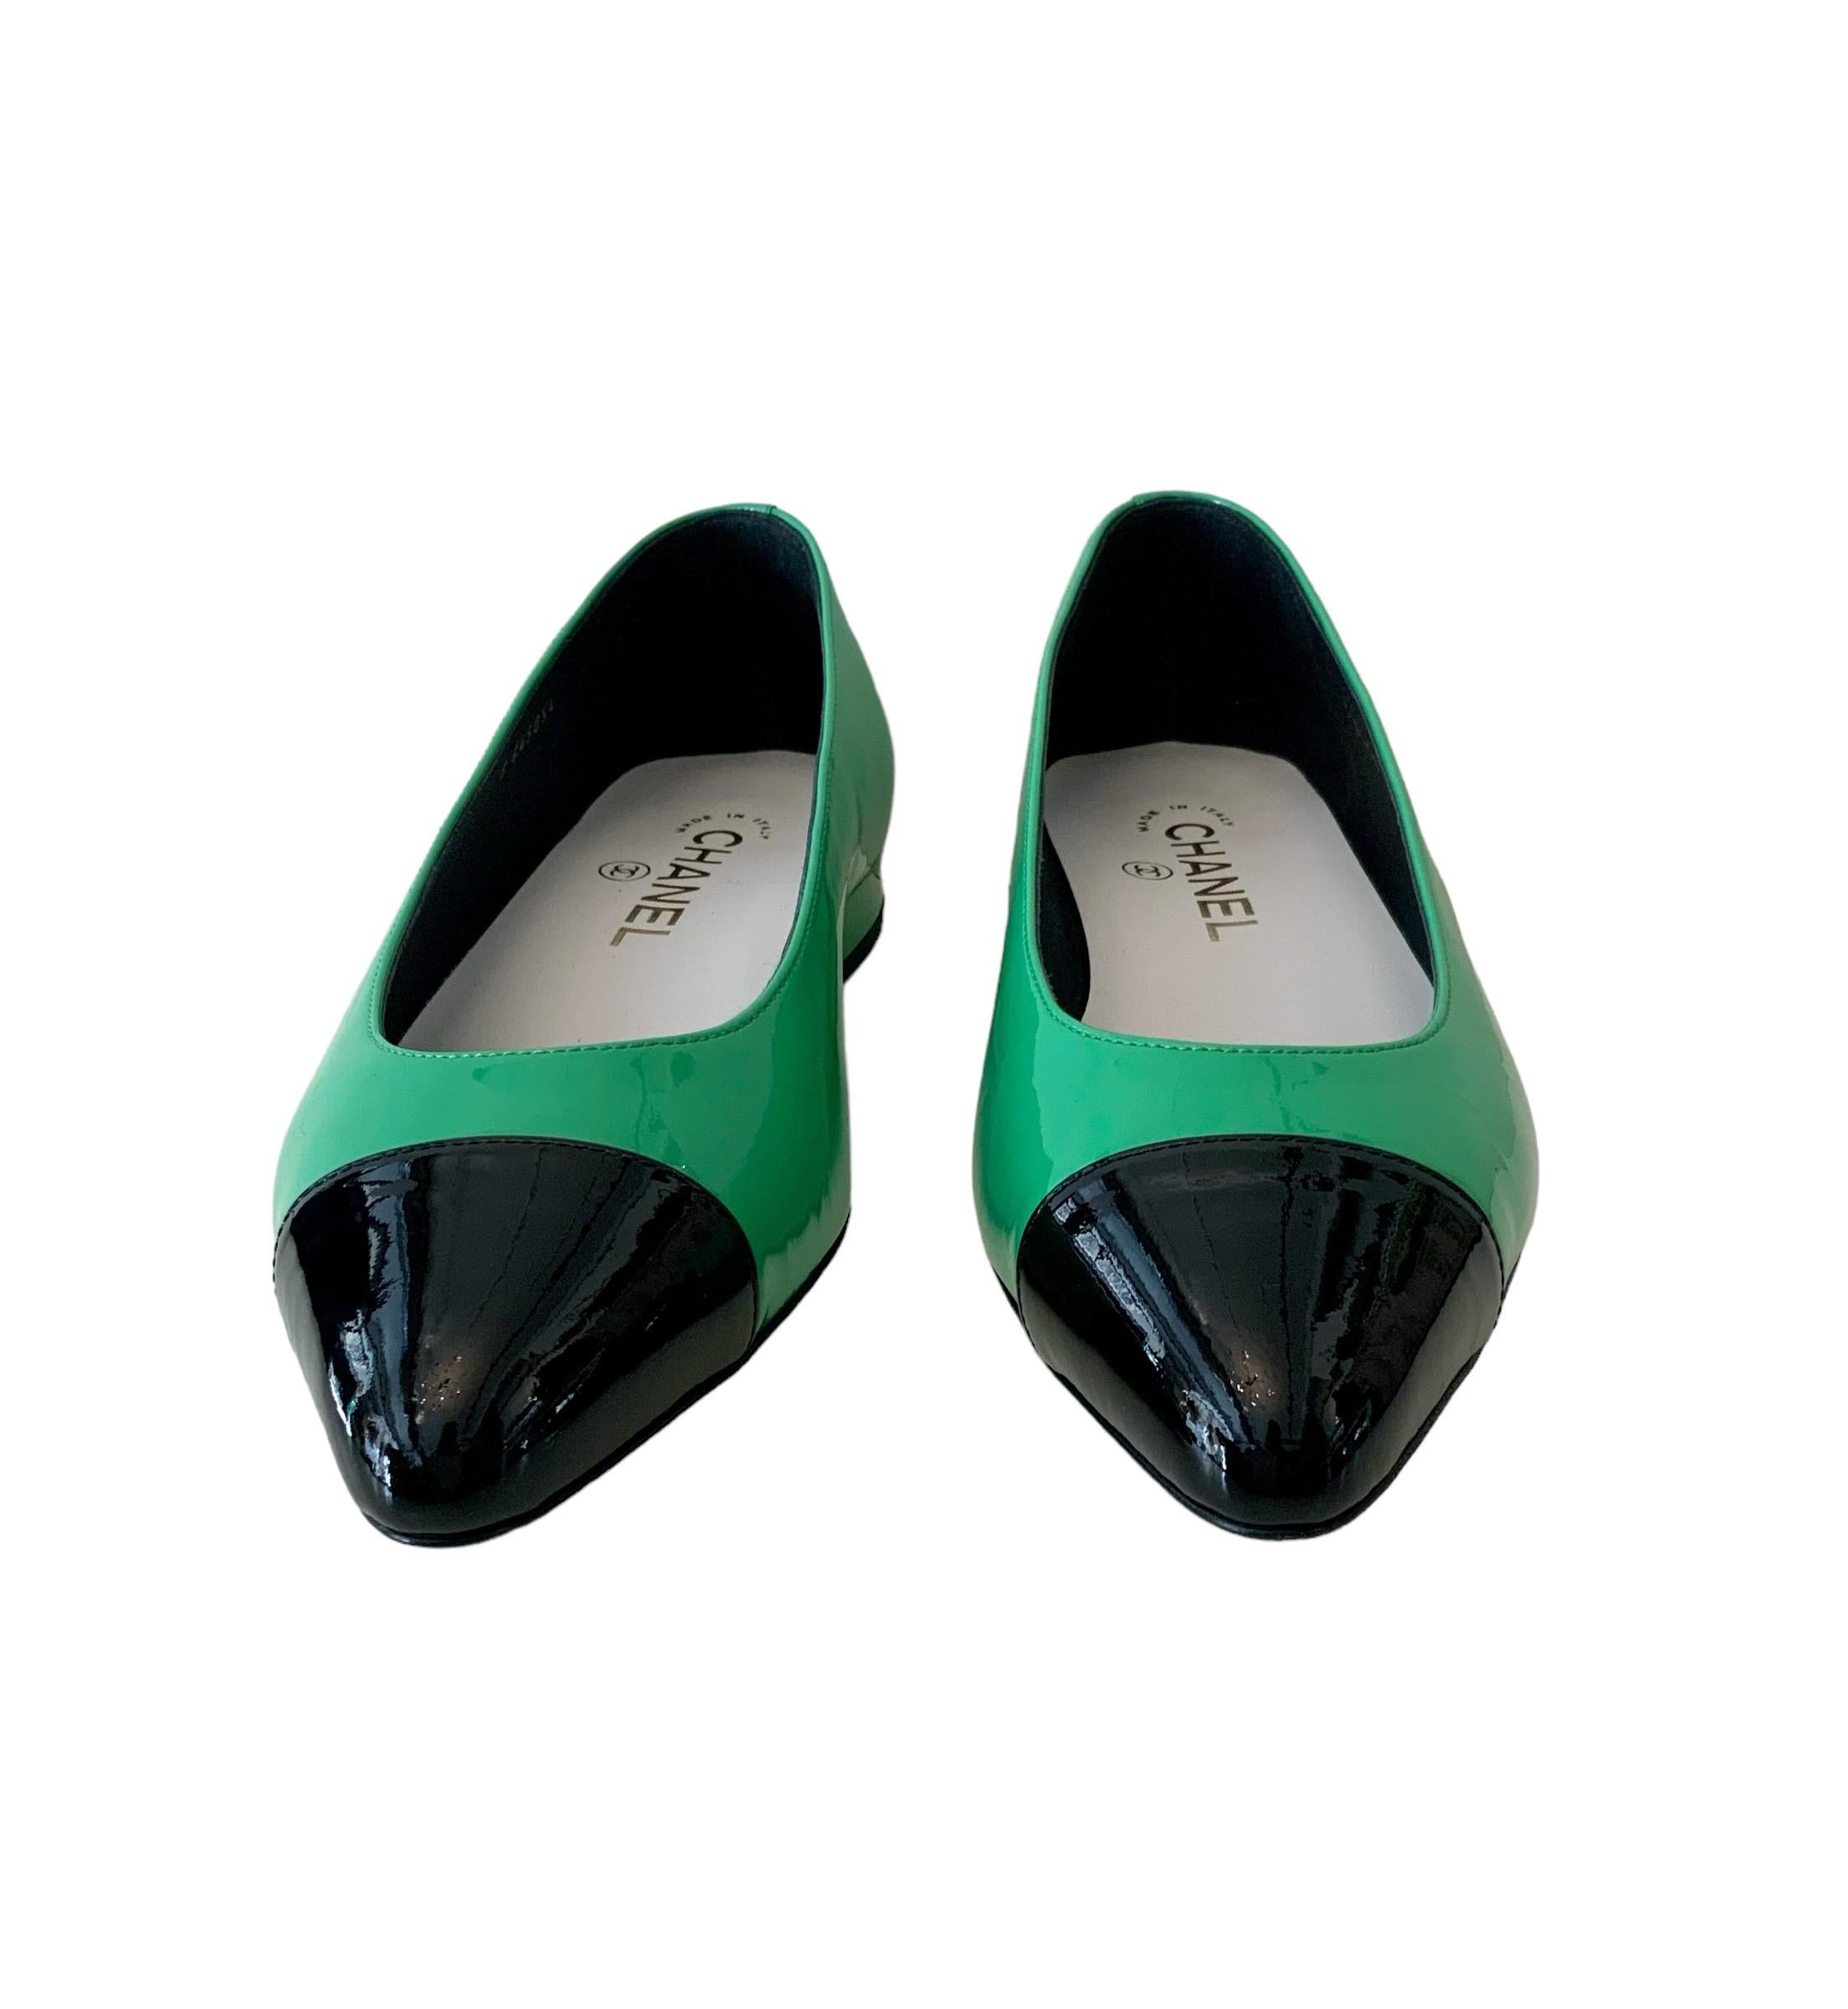 Women's Chanel New Hot Green and Black Patent Ballerinas 